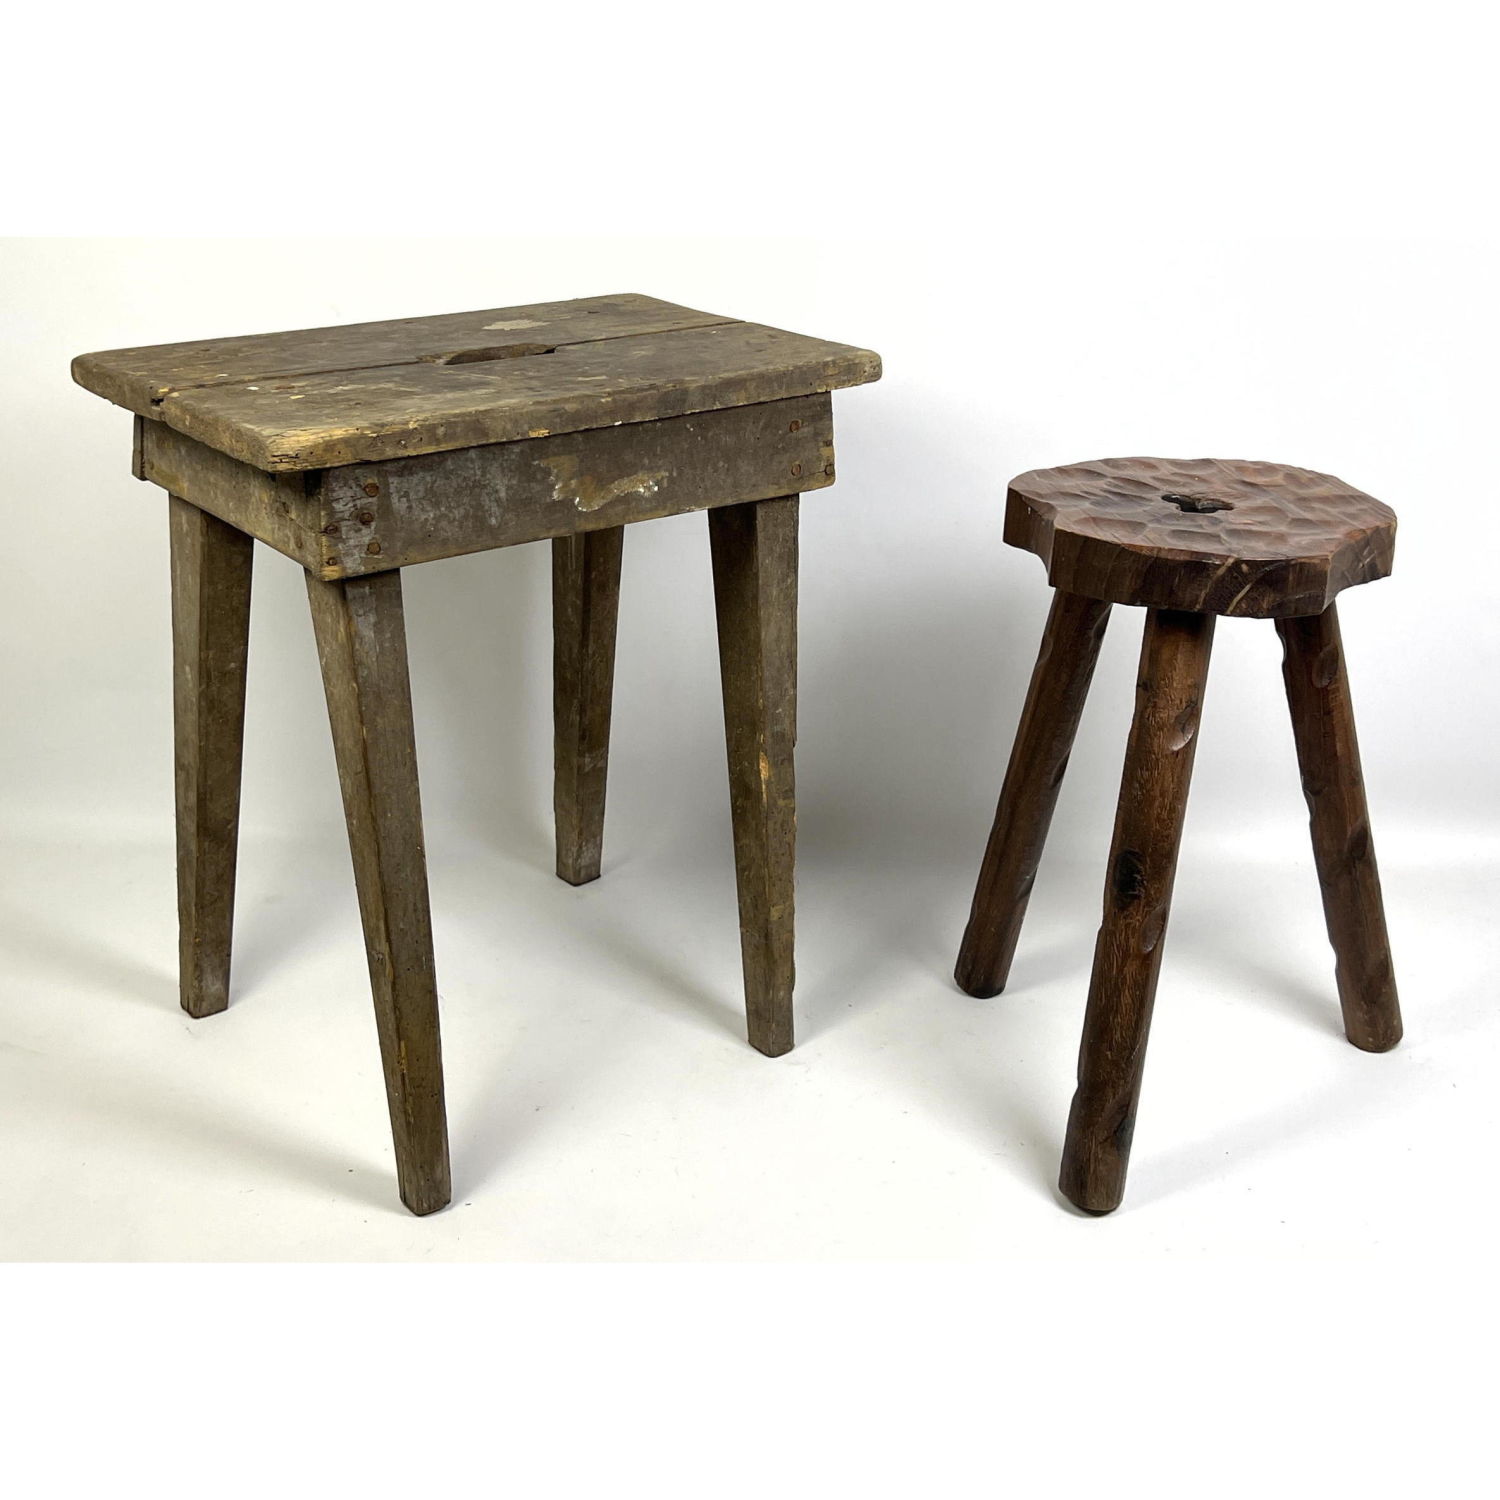 2pcs French Rustic Stools 

Dimensions: